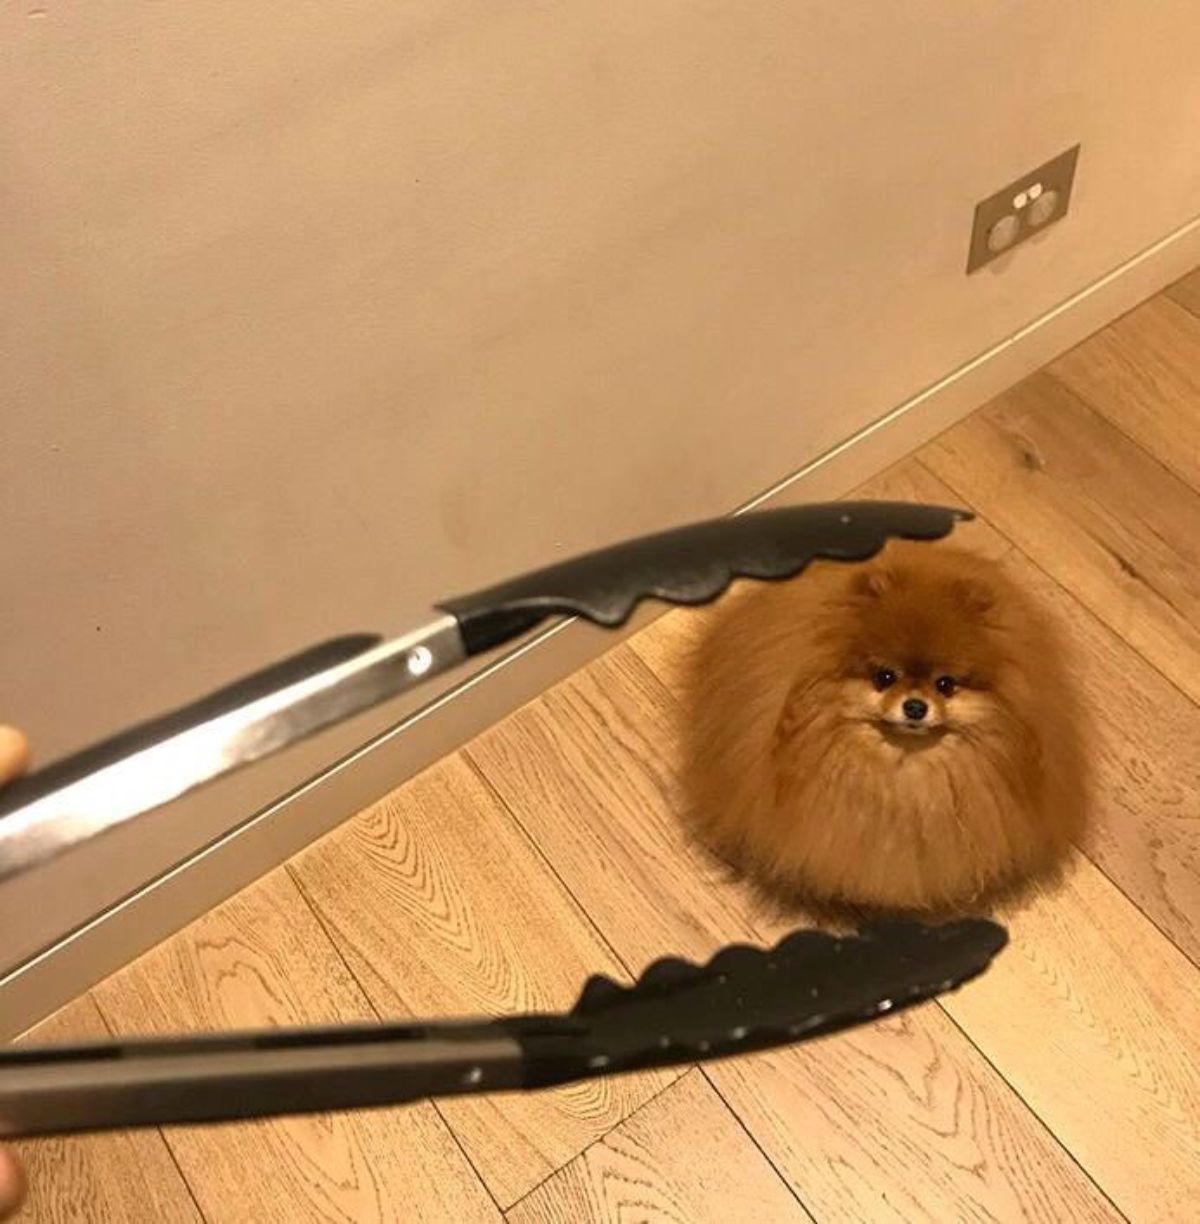 fluffy brown pomeranian sitting on the floor with someone holding metal tongs above the dog looking like they're holding the dog